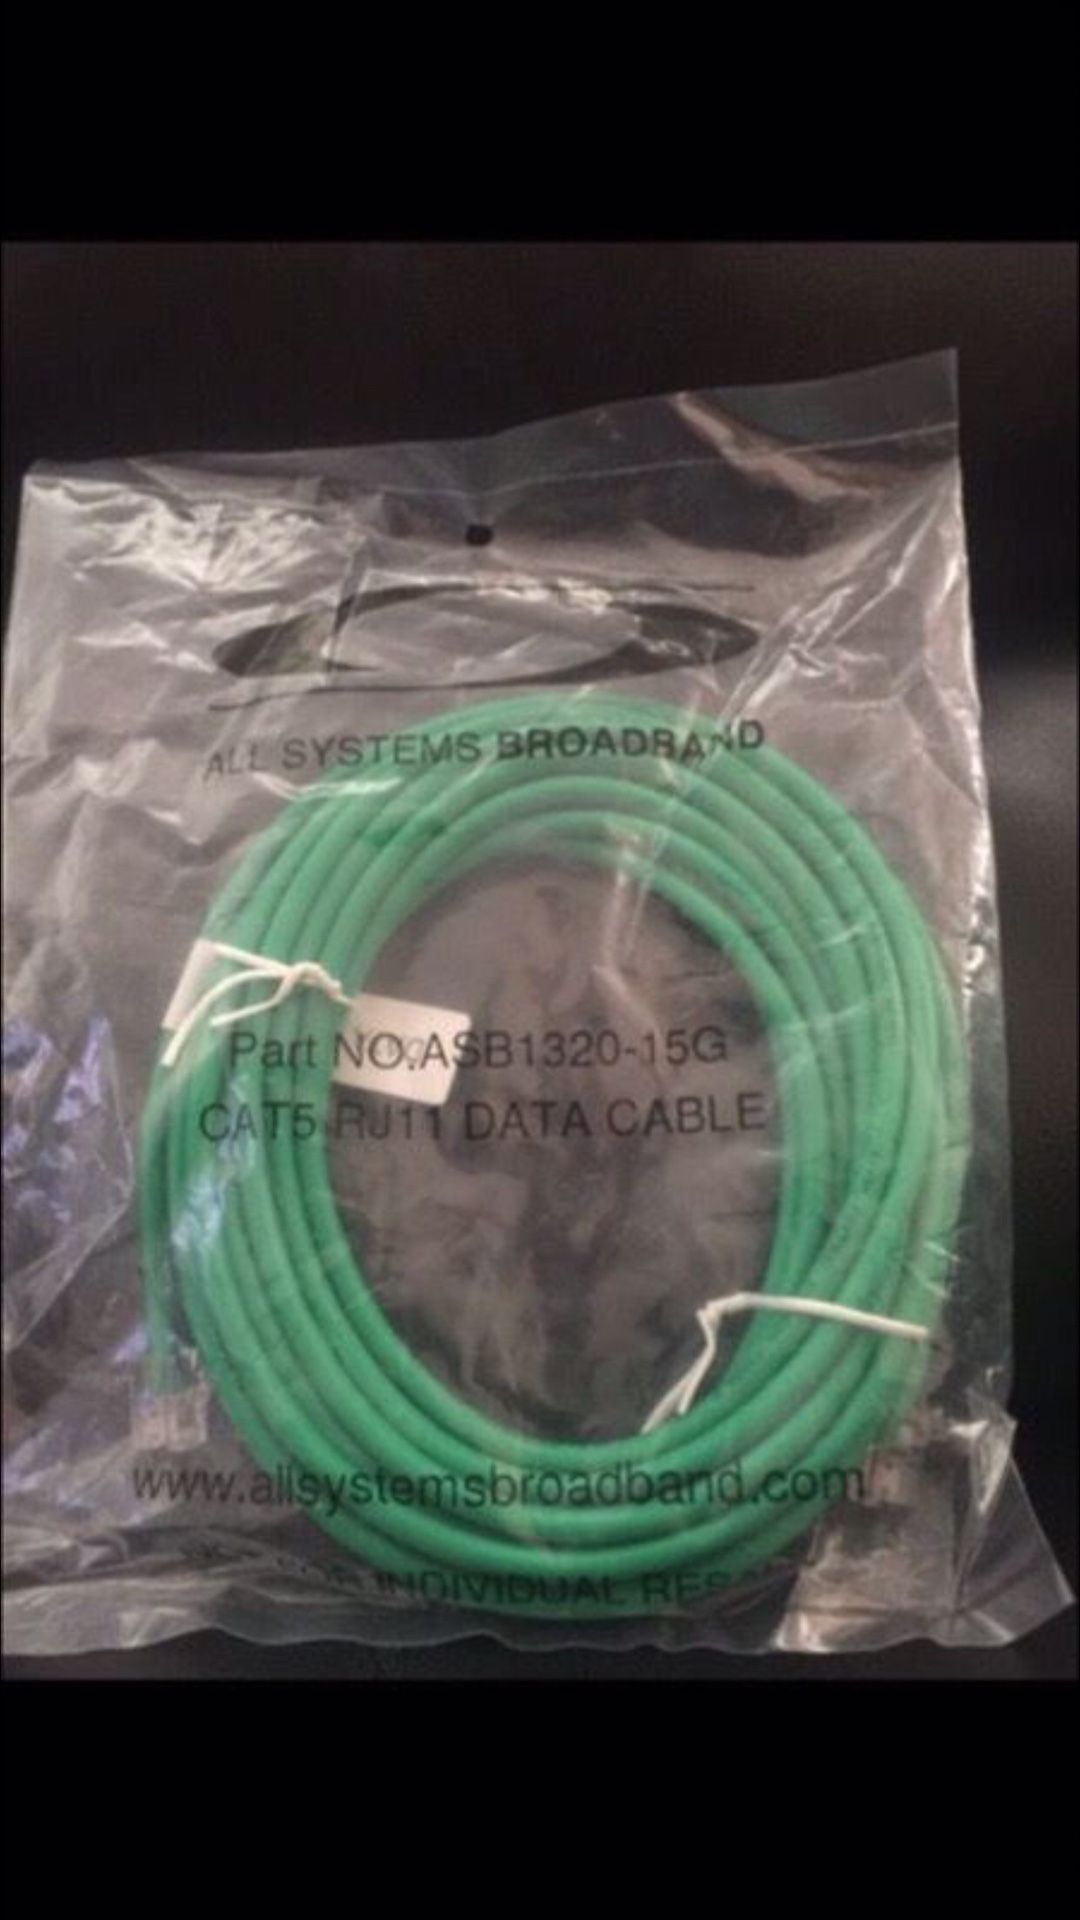 2 FOR $5 OR 5 FOR $10...... BRAND NEW CAT5 RJ-11 DATA CABLES FOR VOICE AND DATA SYSTEMS.... ALSO COMPATIBLE WITH DSL MODEMS FOR AT&T, TIME WARNER, VE